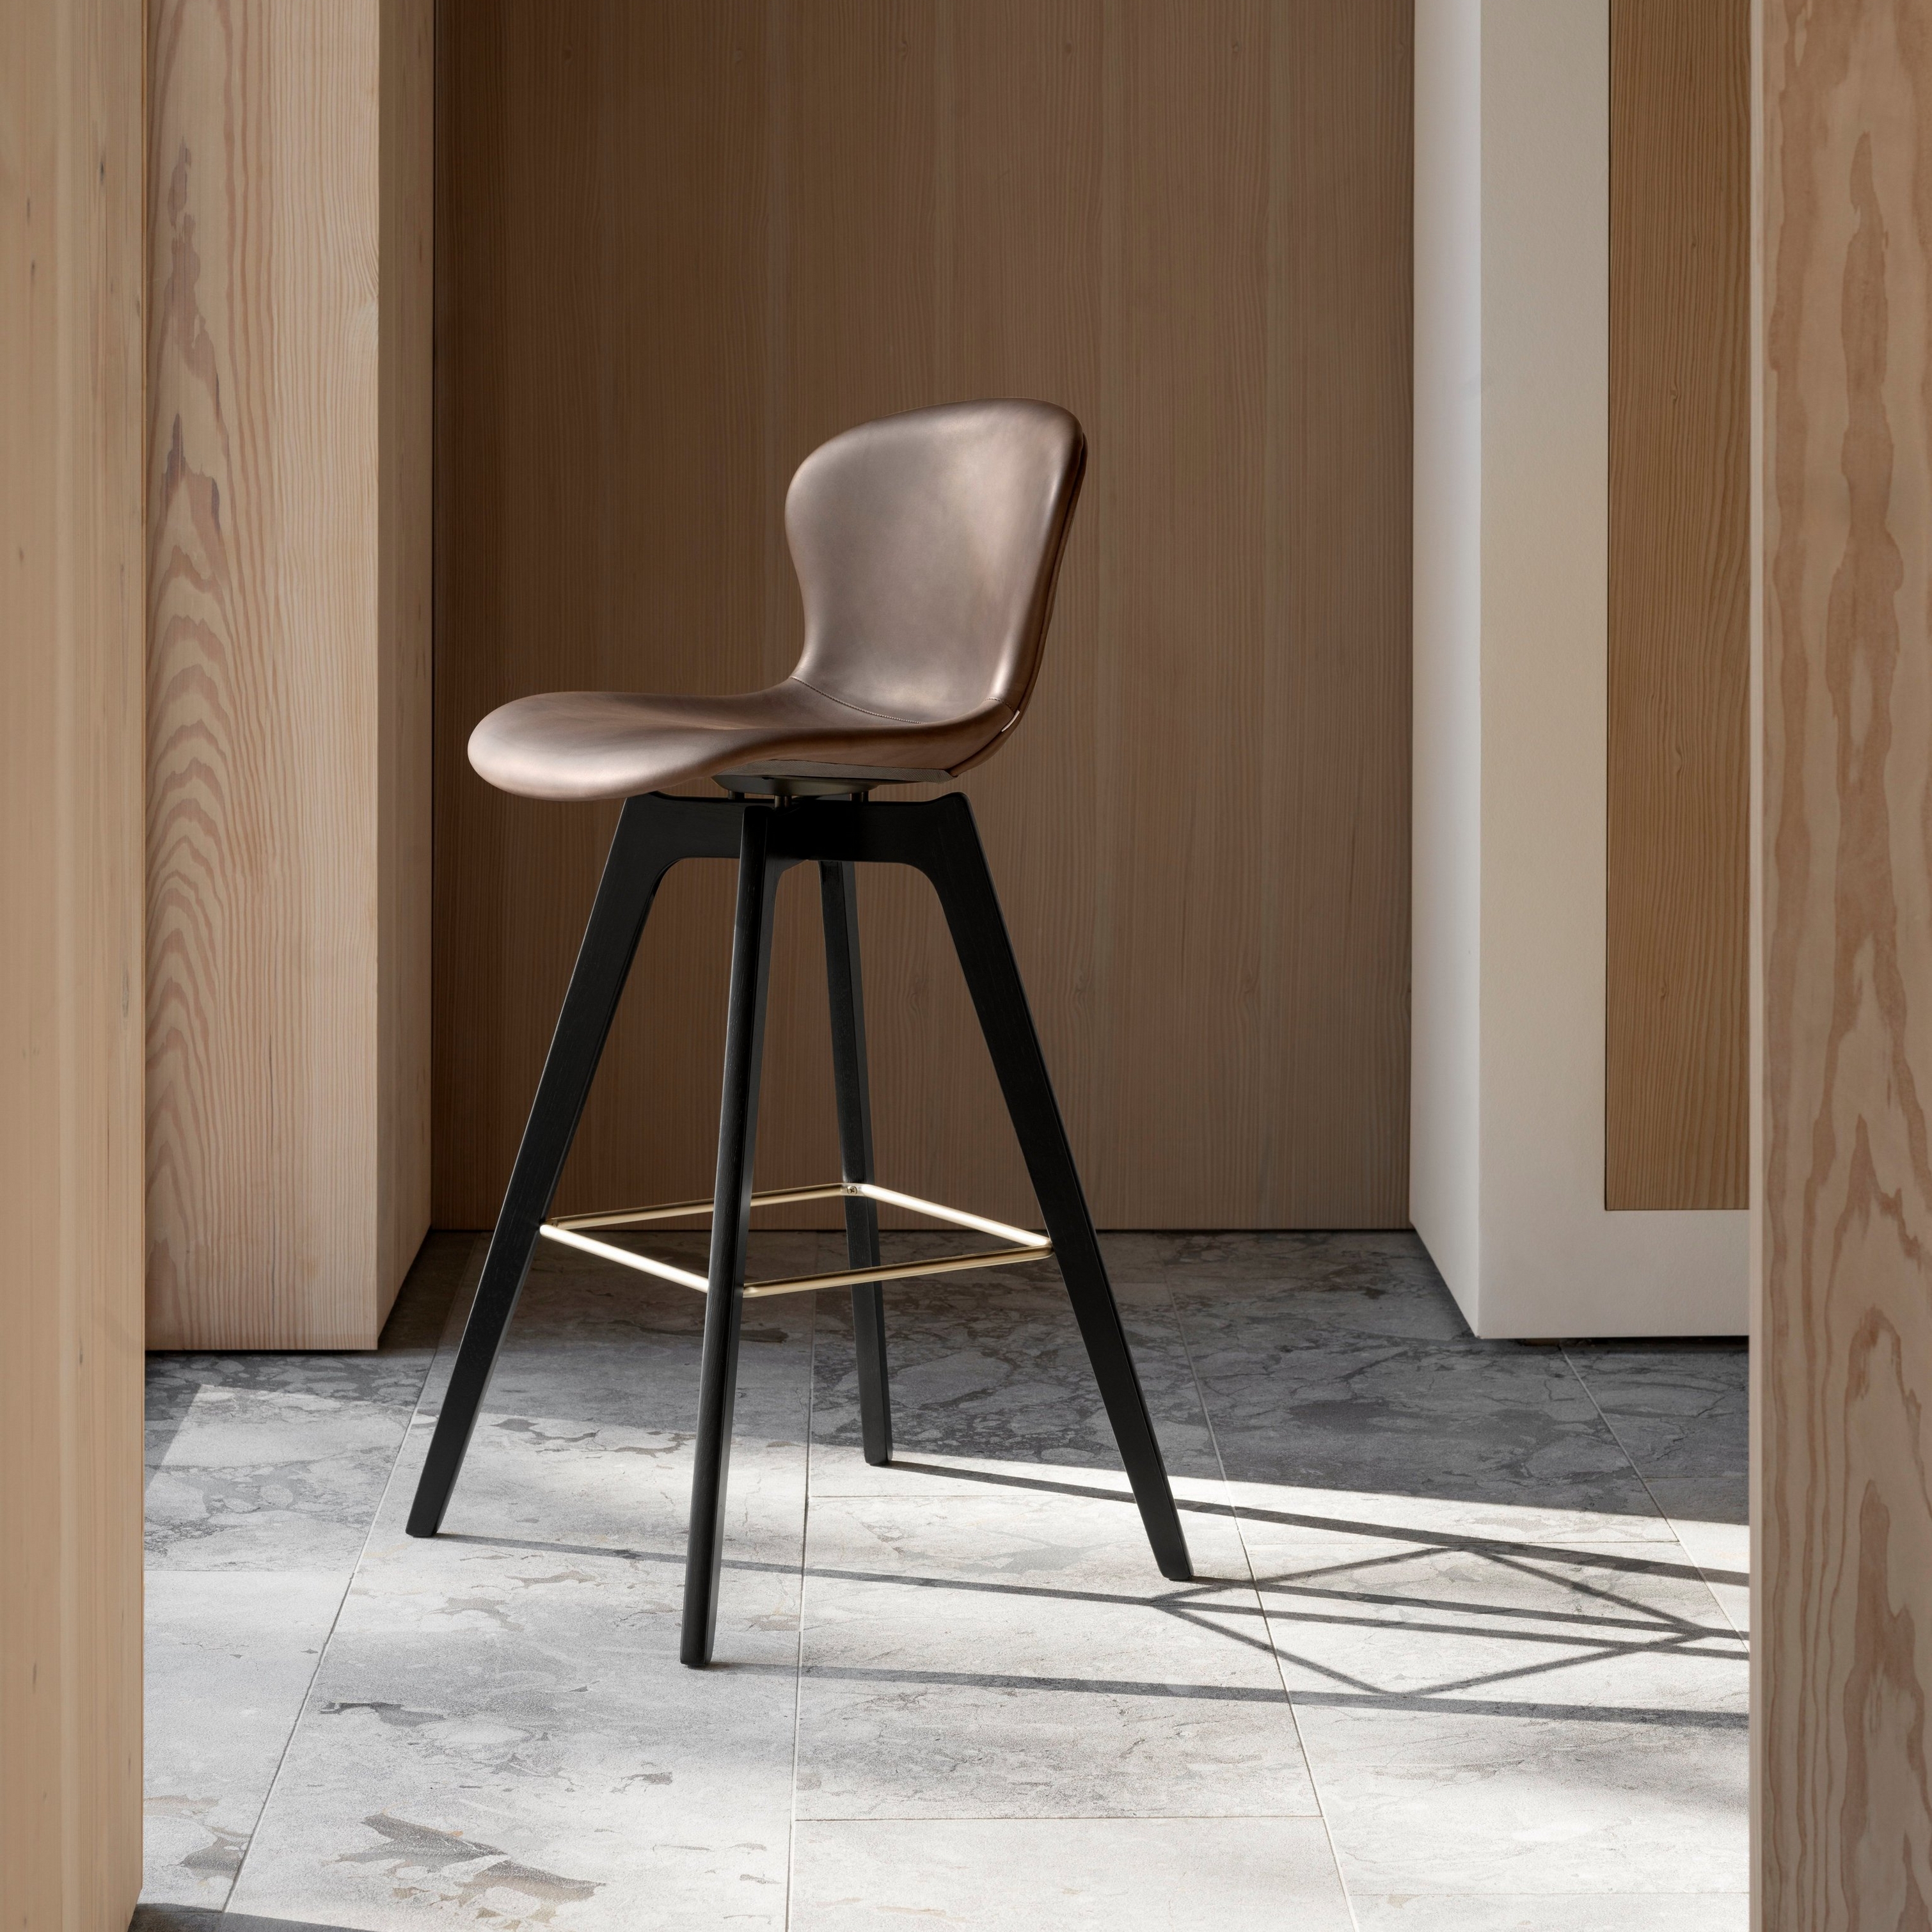 Adelaide bar stool placed in an open room